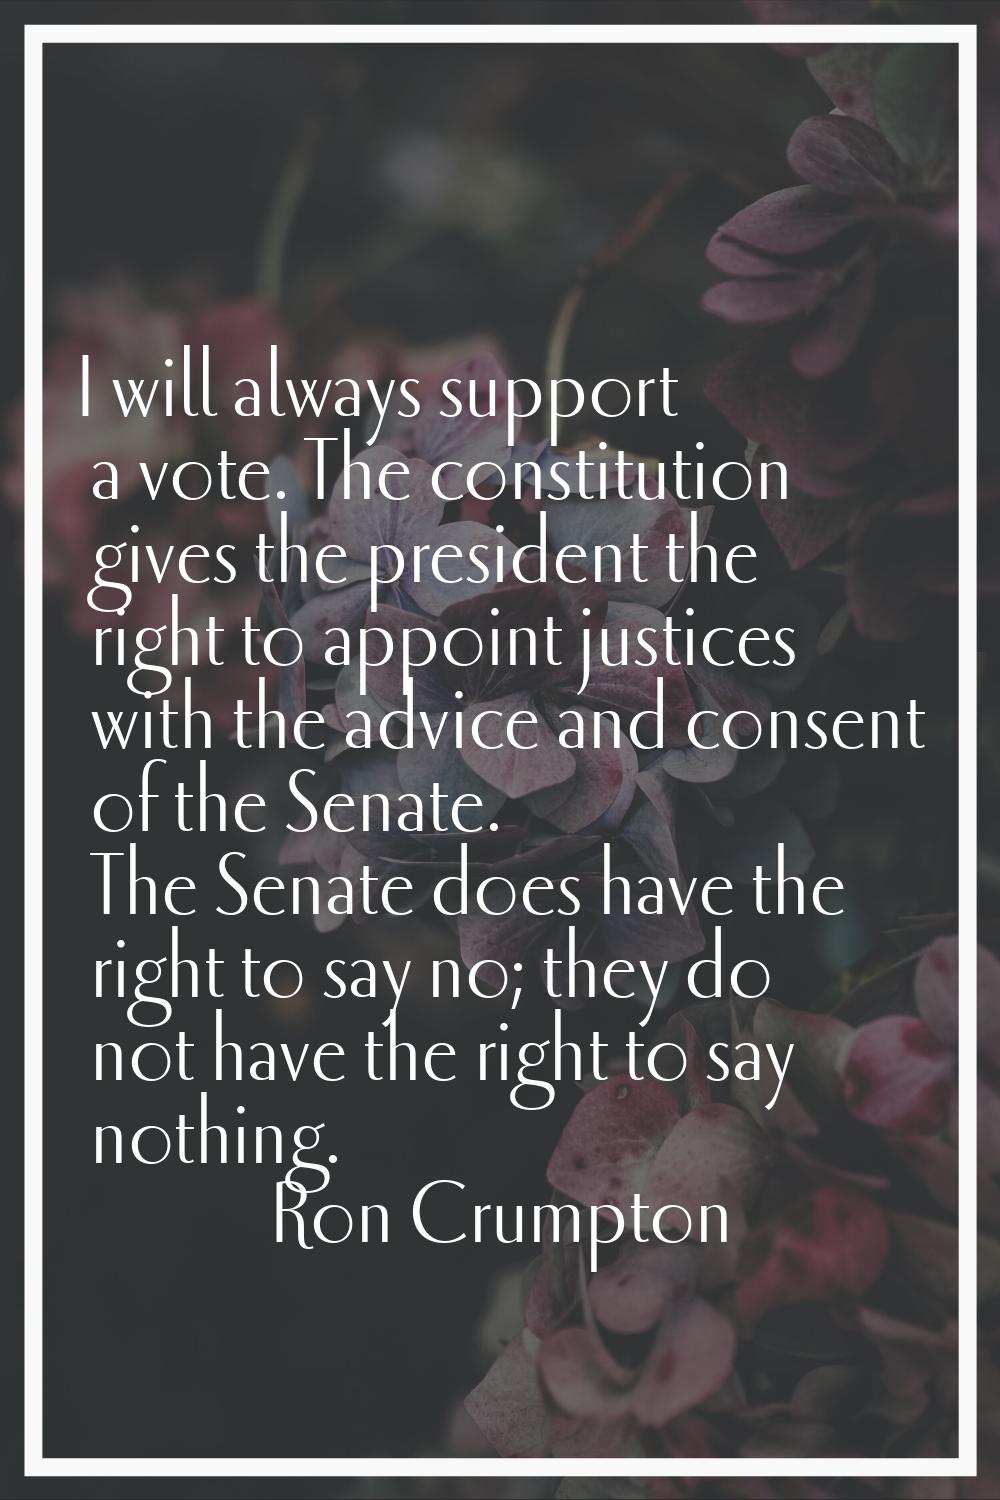 I will always support a vote. The constitution gives the president the right to appoint justices wi